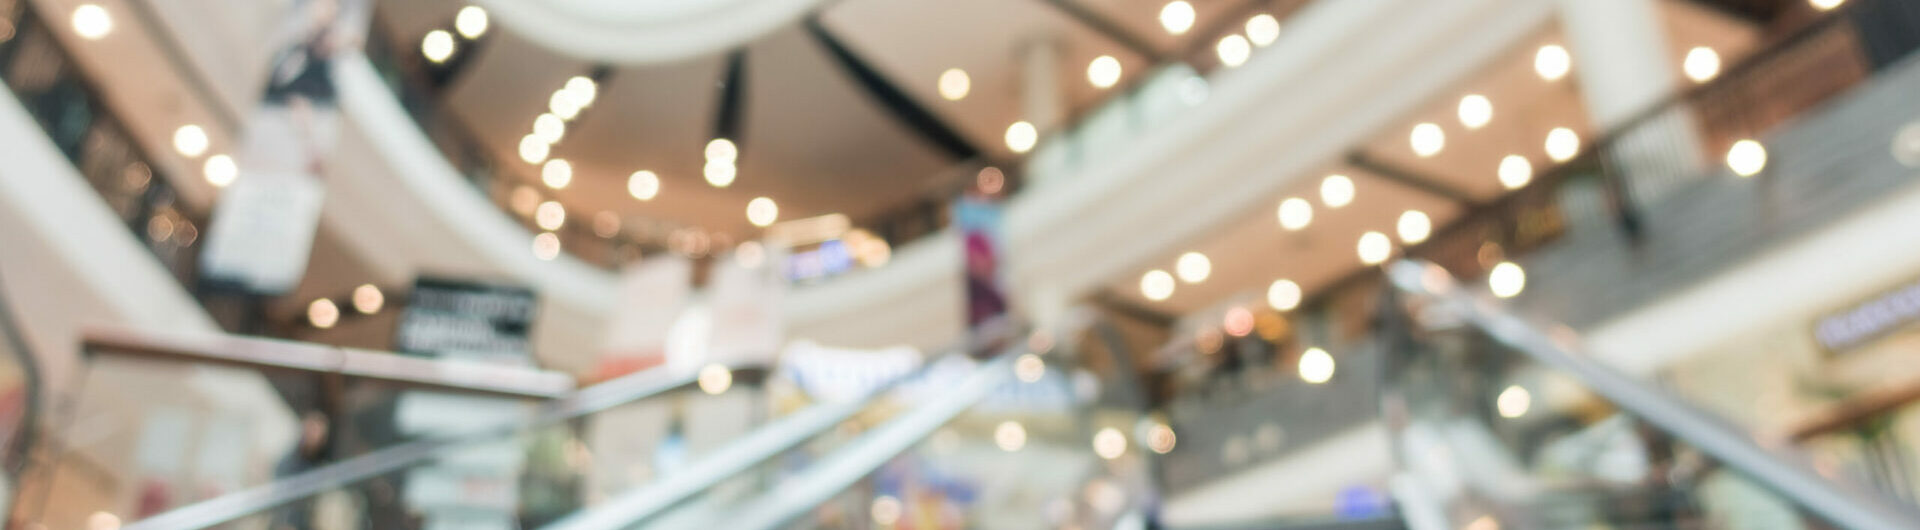 Abstract blur beautiful luxury shopping mall center and shop retail store interior for background